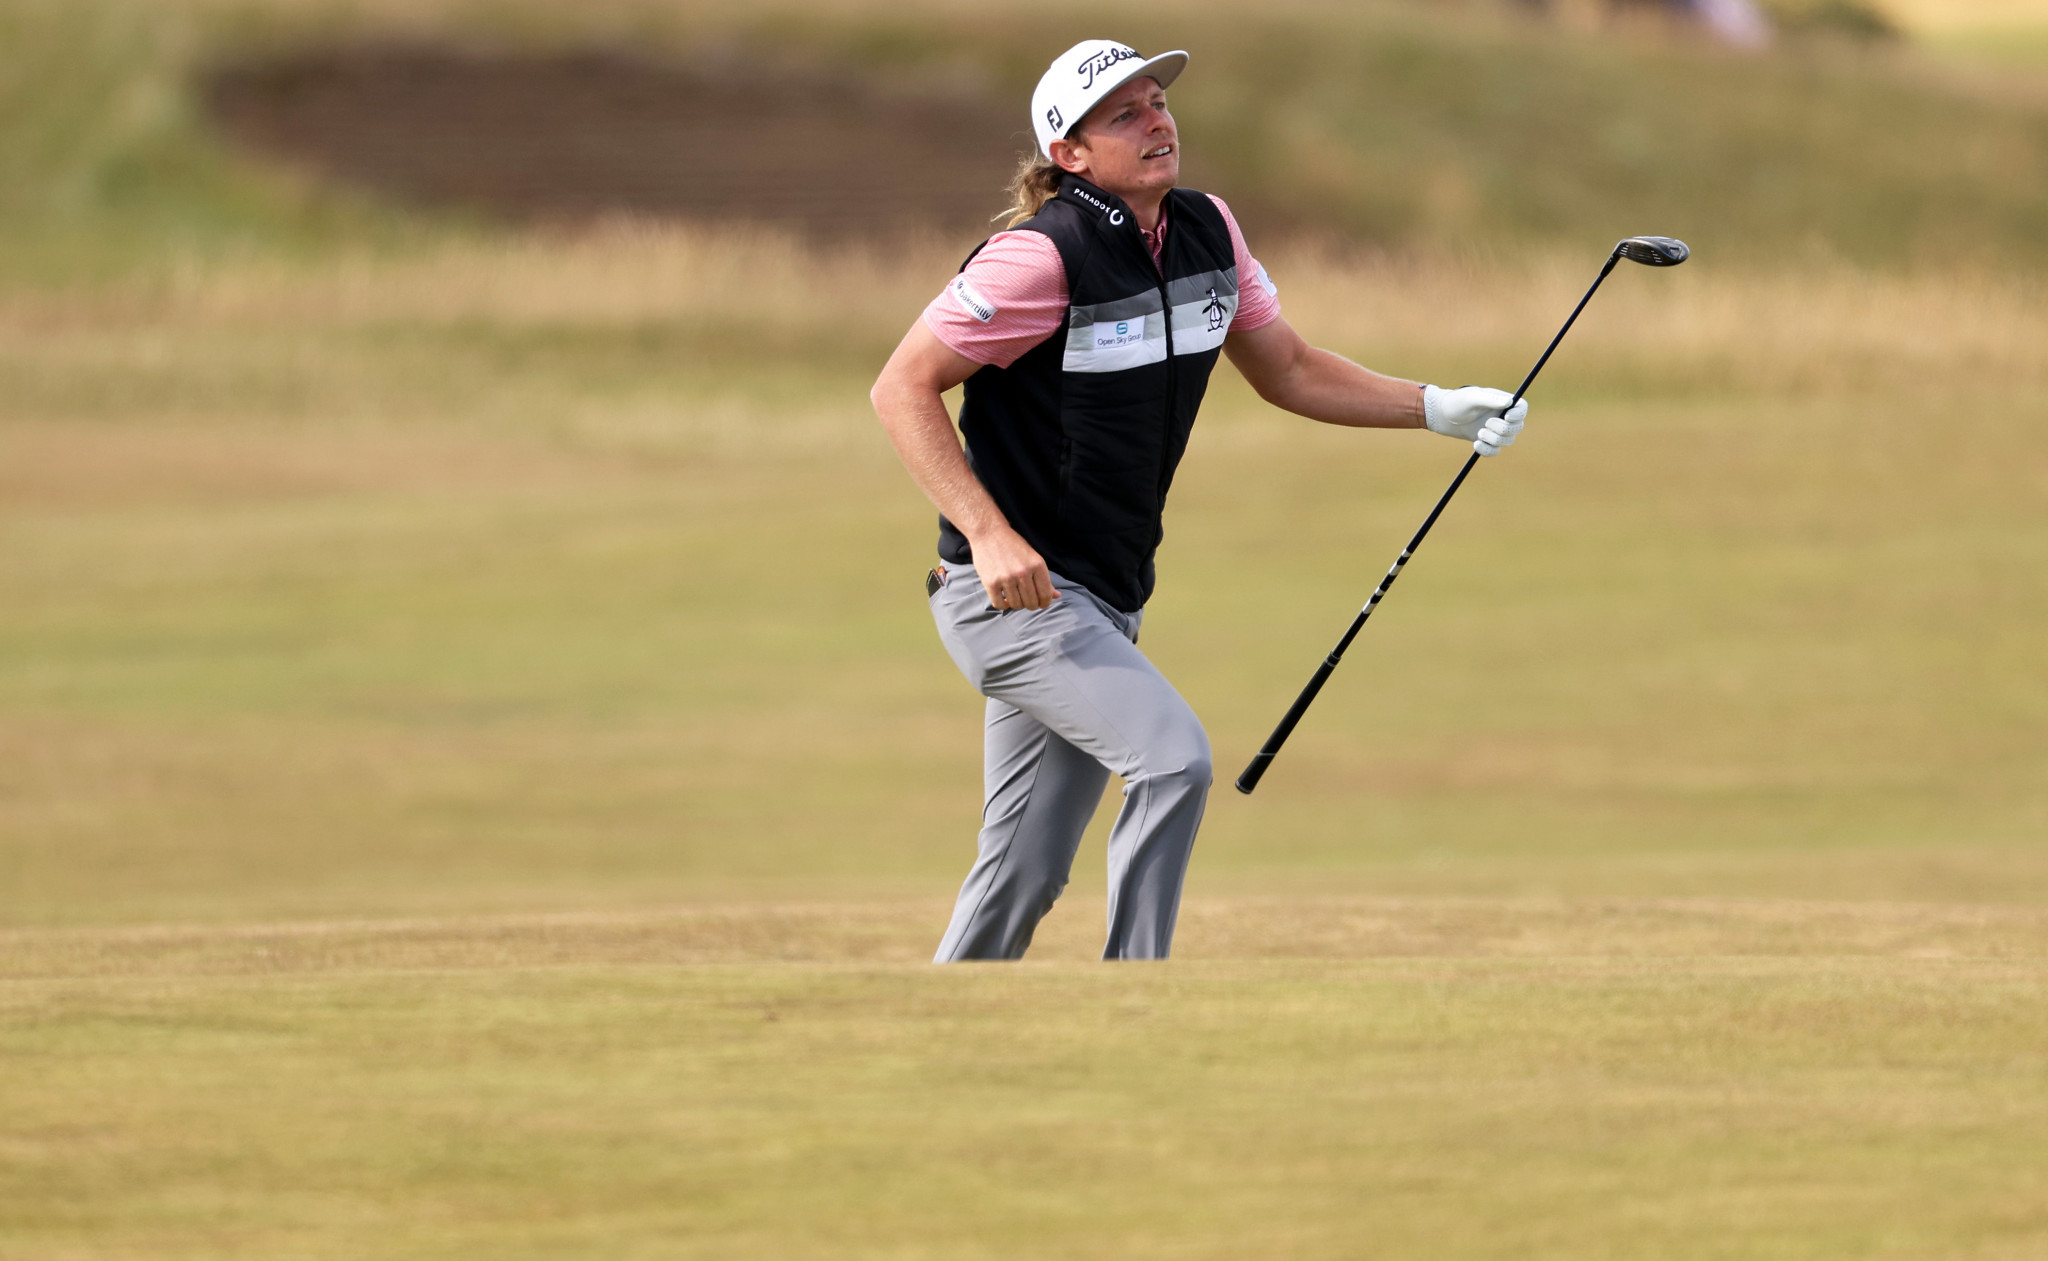 Smith takes half-way lead after record breaking performance at 150th Open